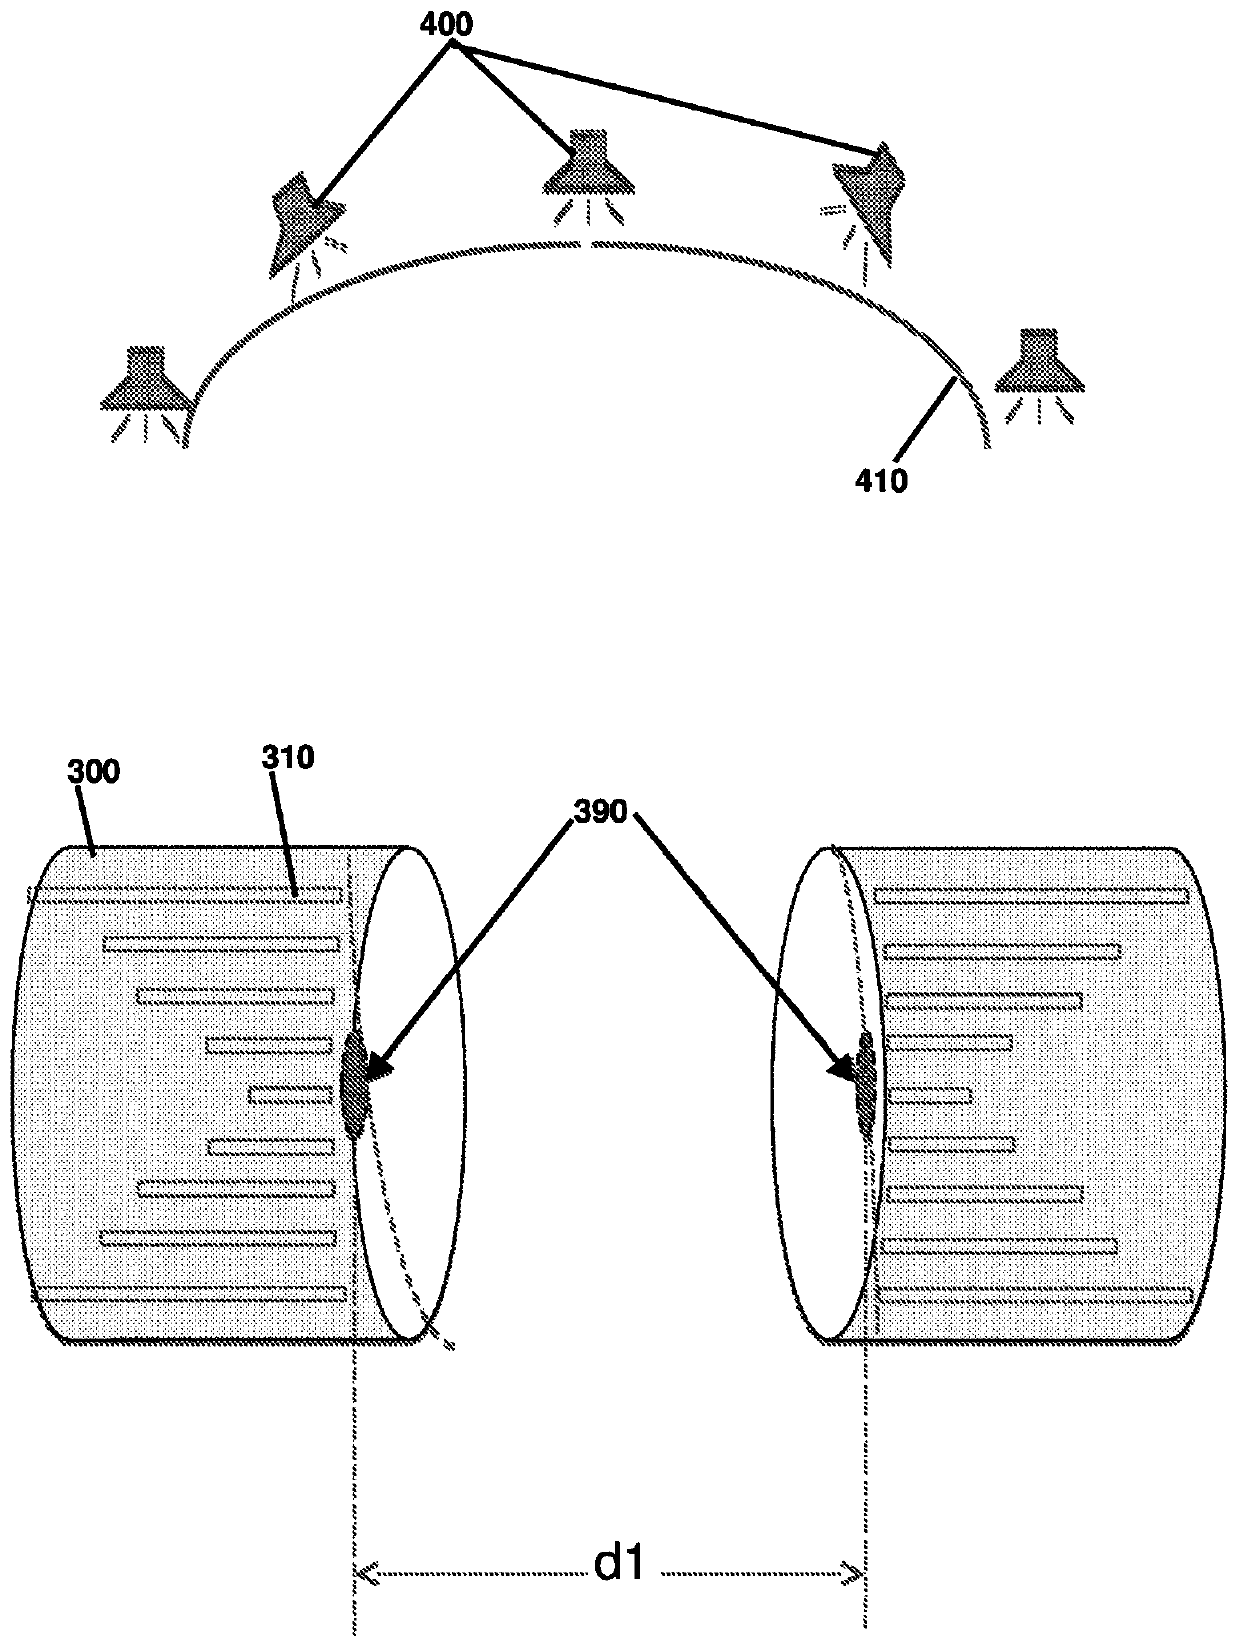 Acoustic holographic recording and reproduction system using meta material layers